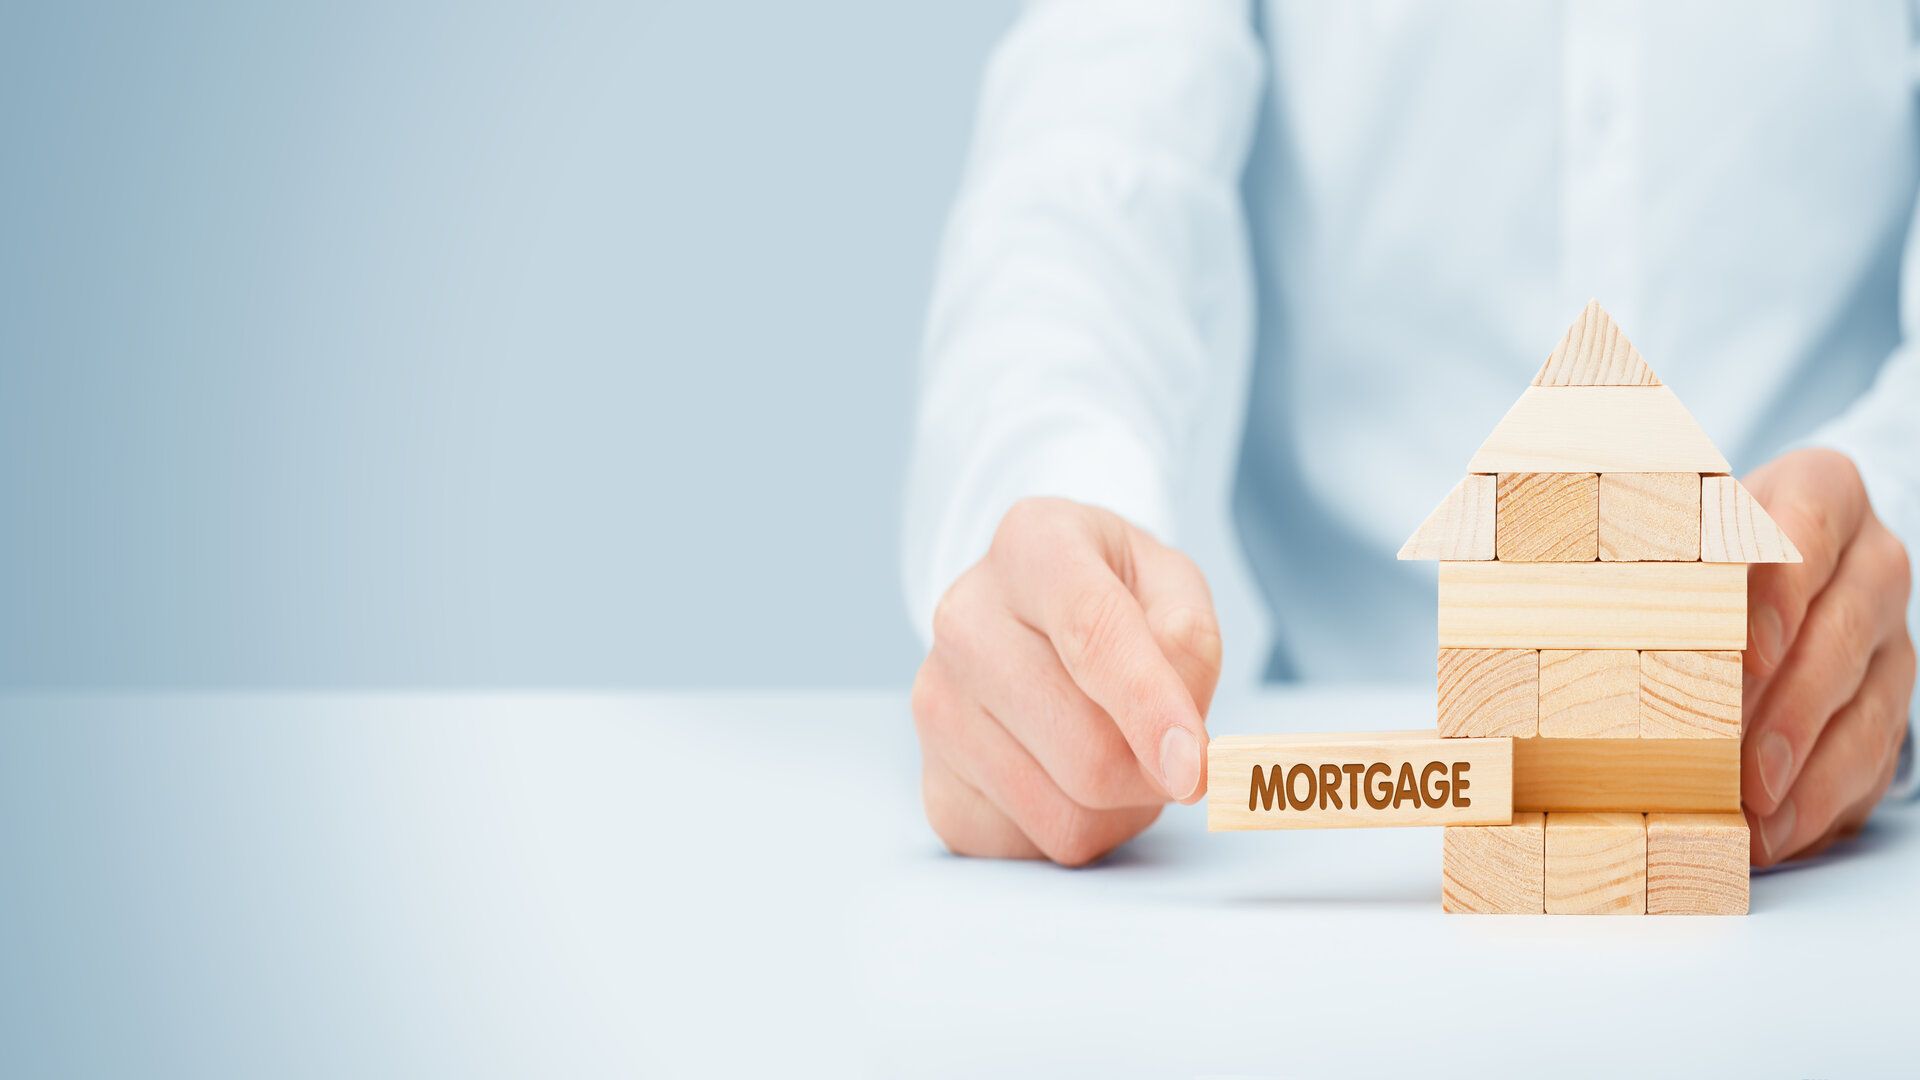 Everything You Need to Know About a Mortgage